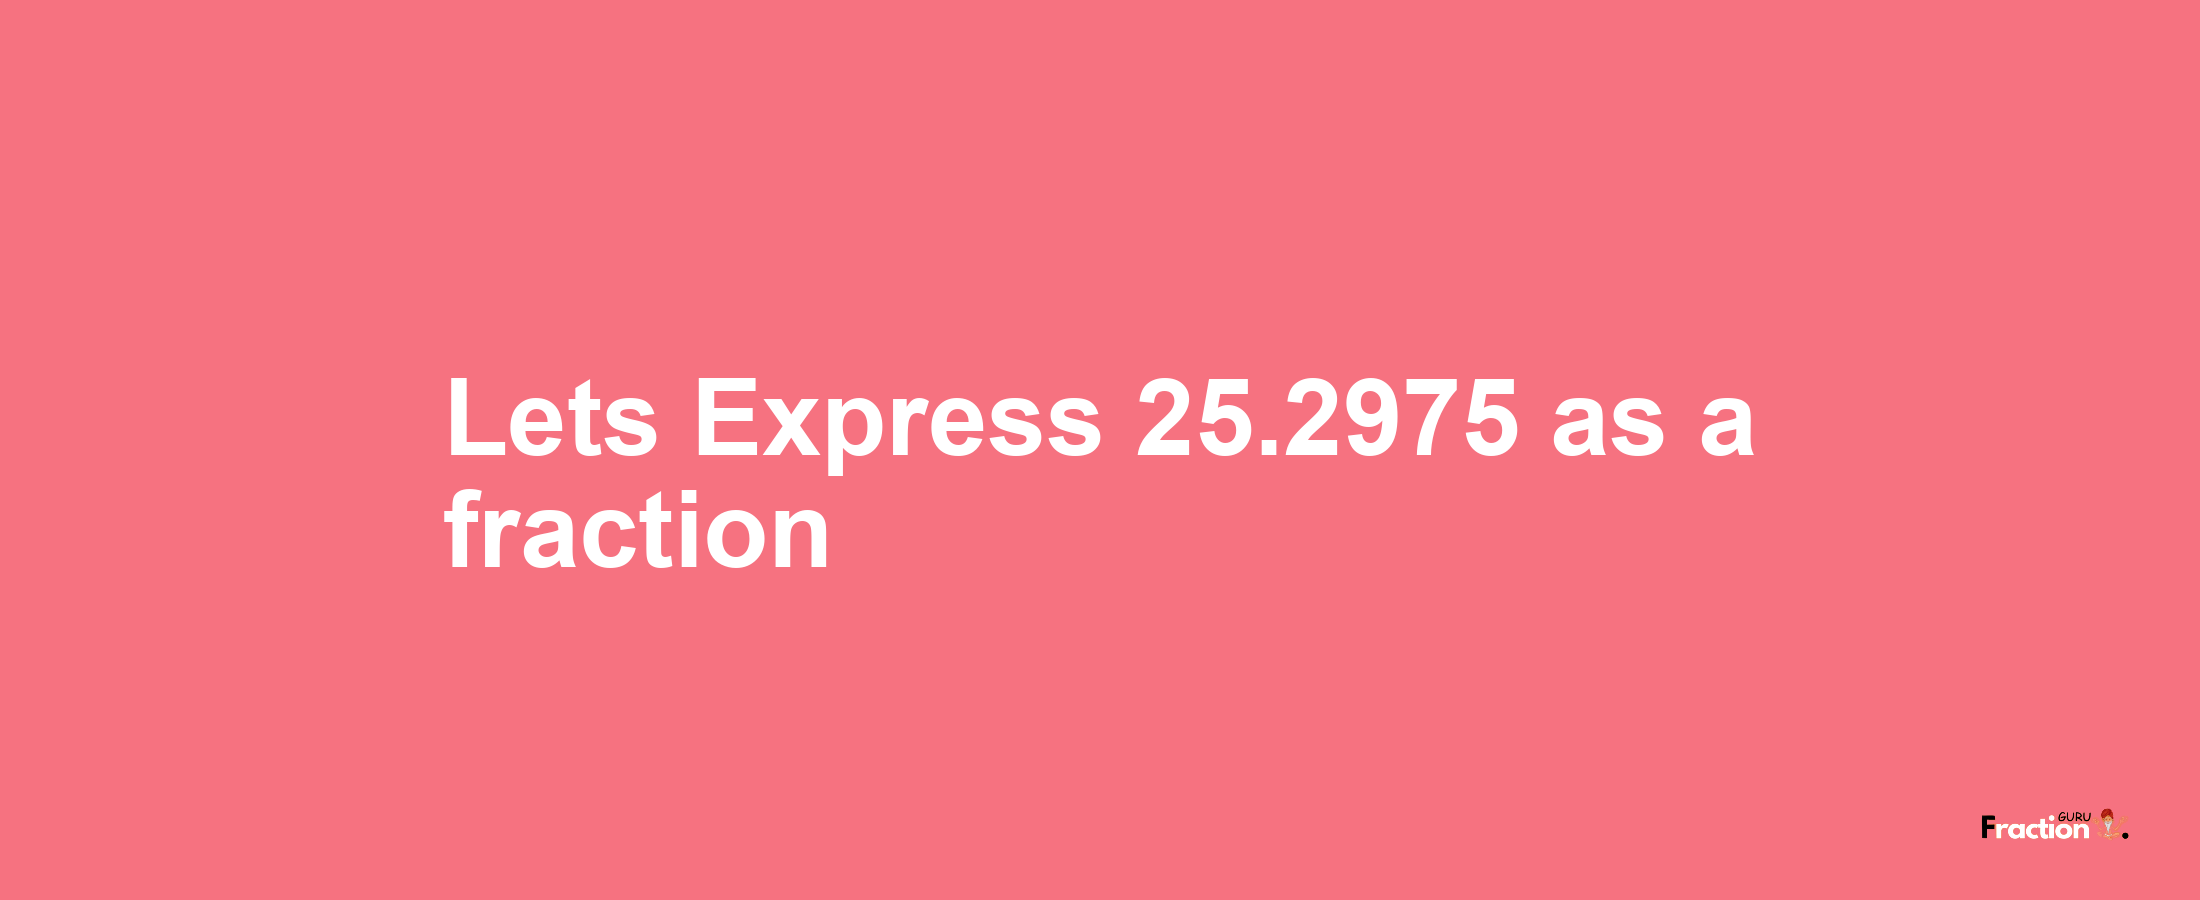 Lets Express 25.2975 as afraction